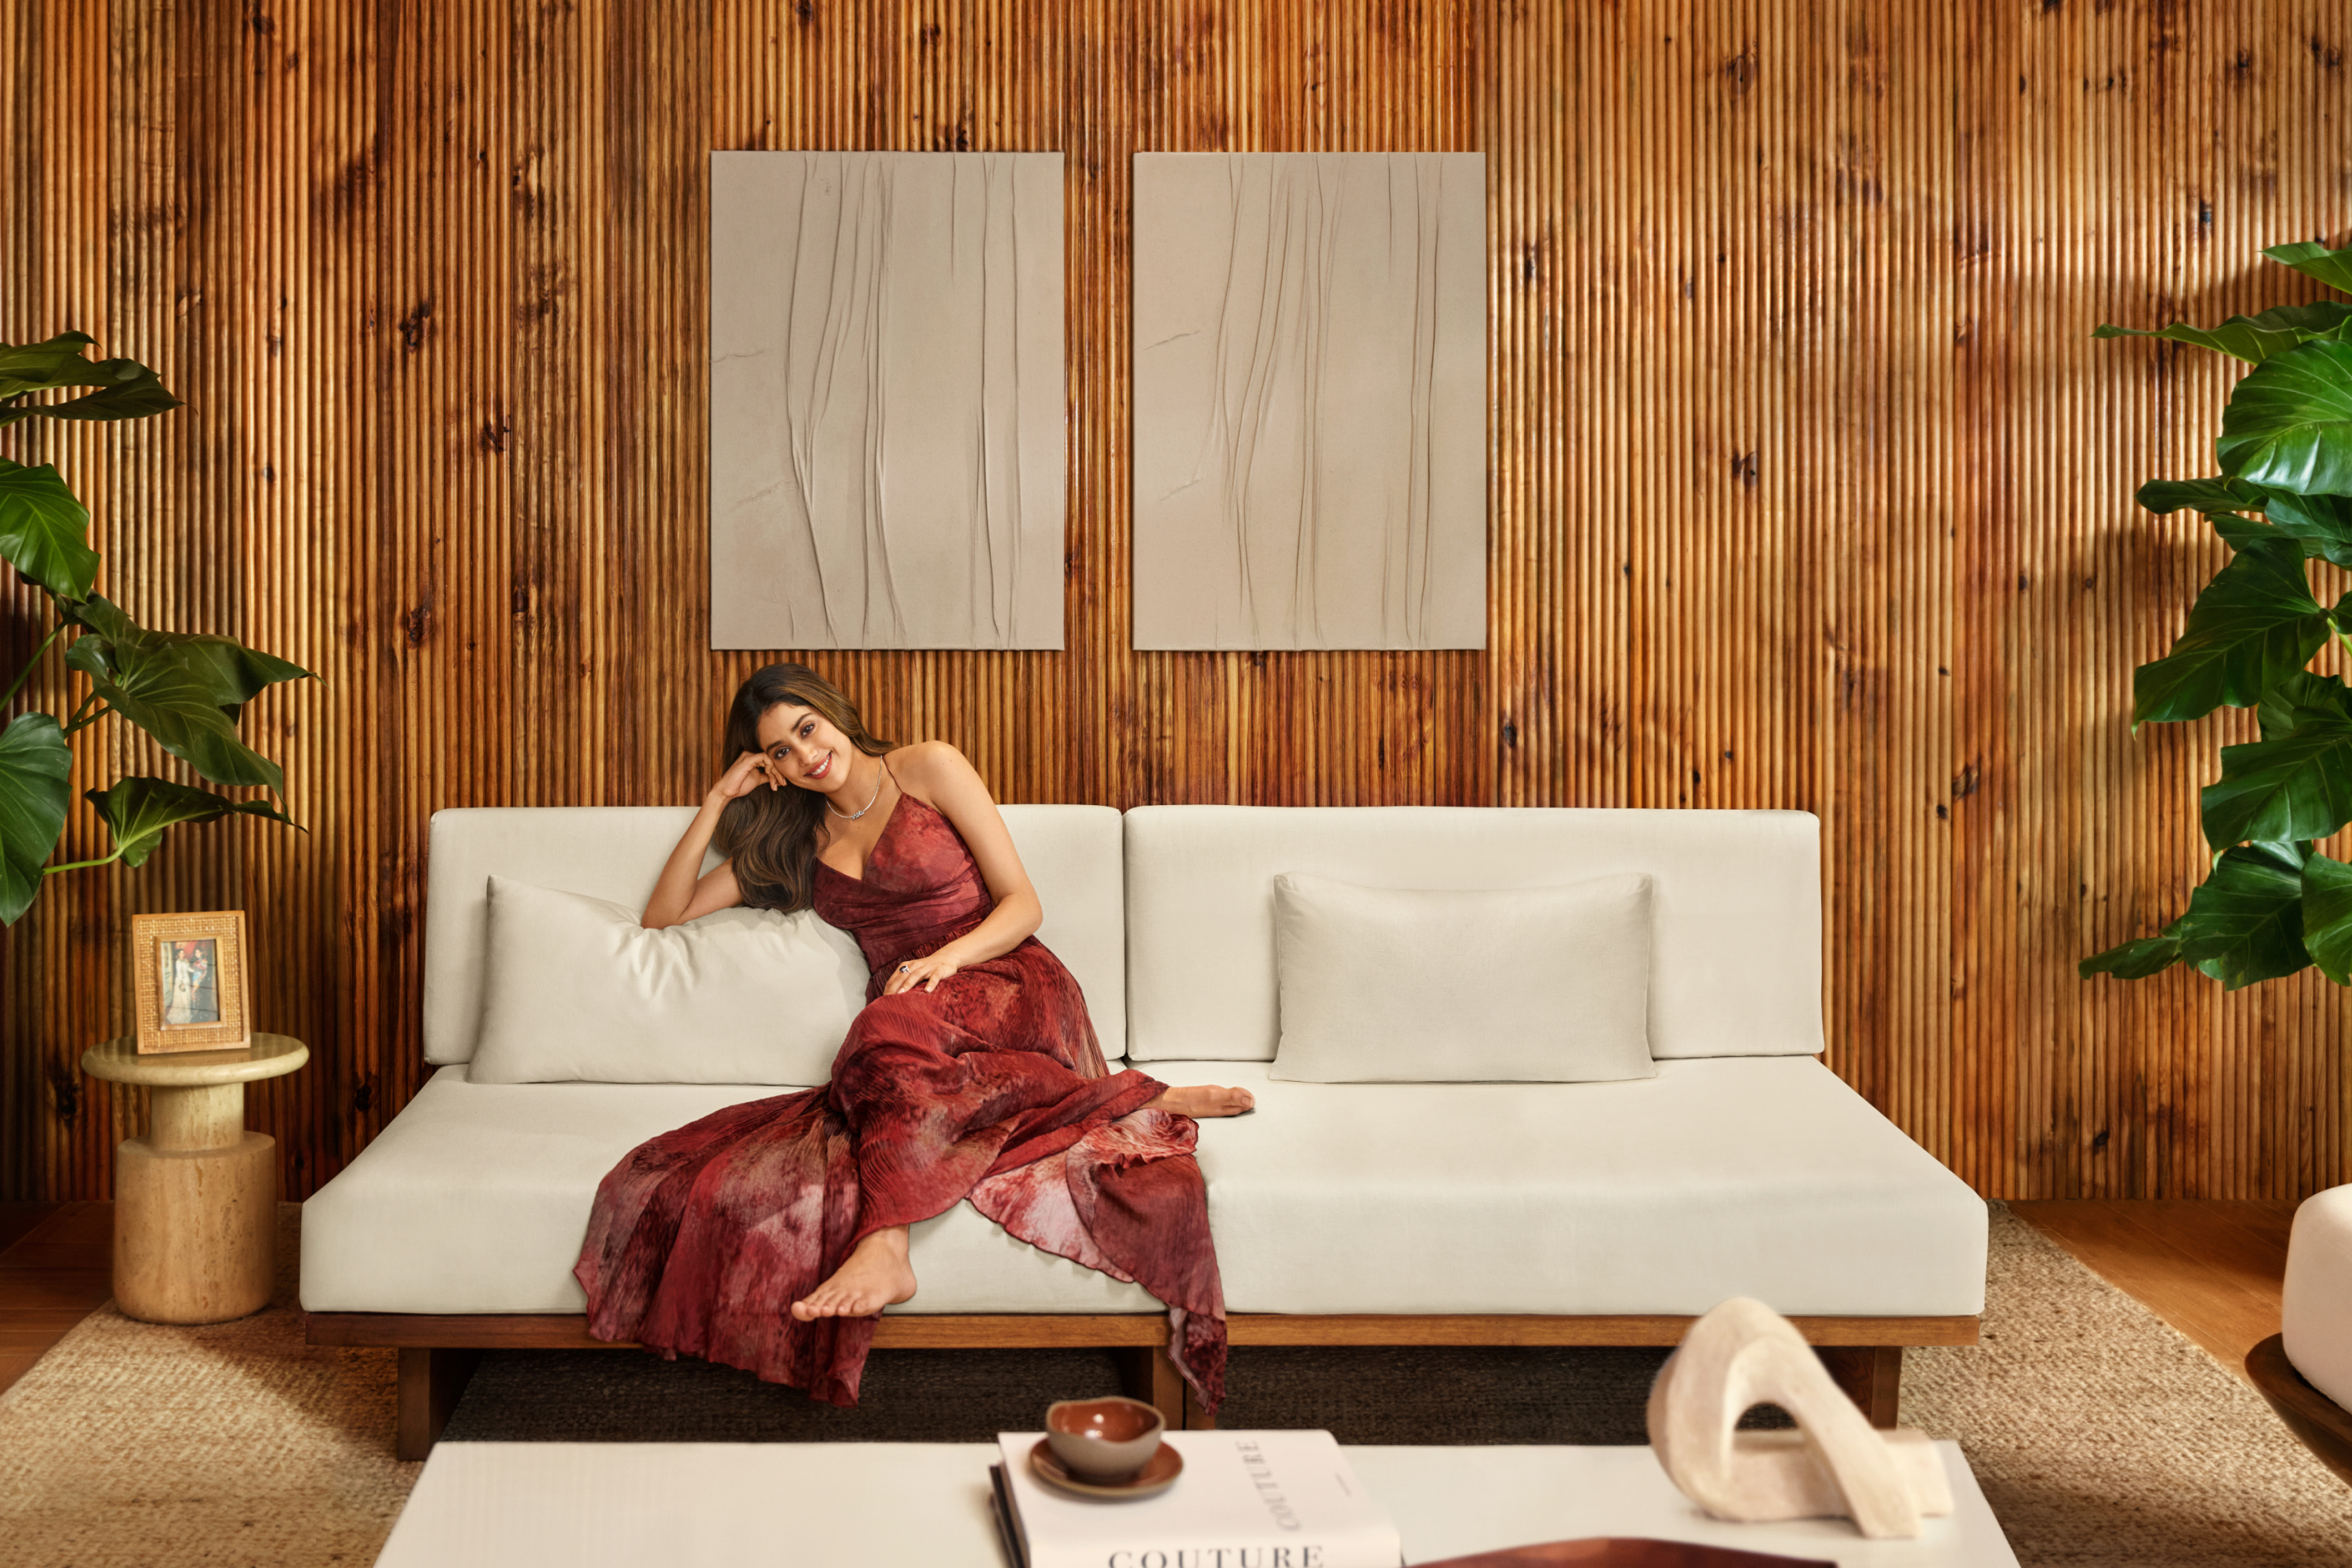 Woman in a red dress smiling and sitting on a white couch against a wood paneled wall. 